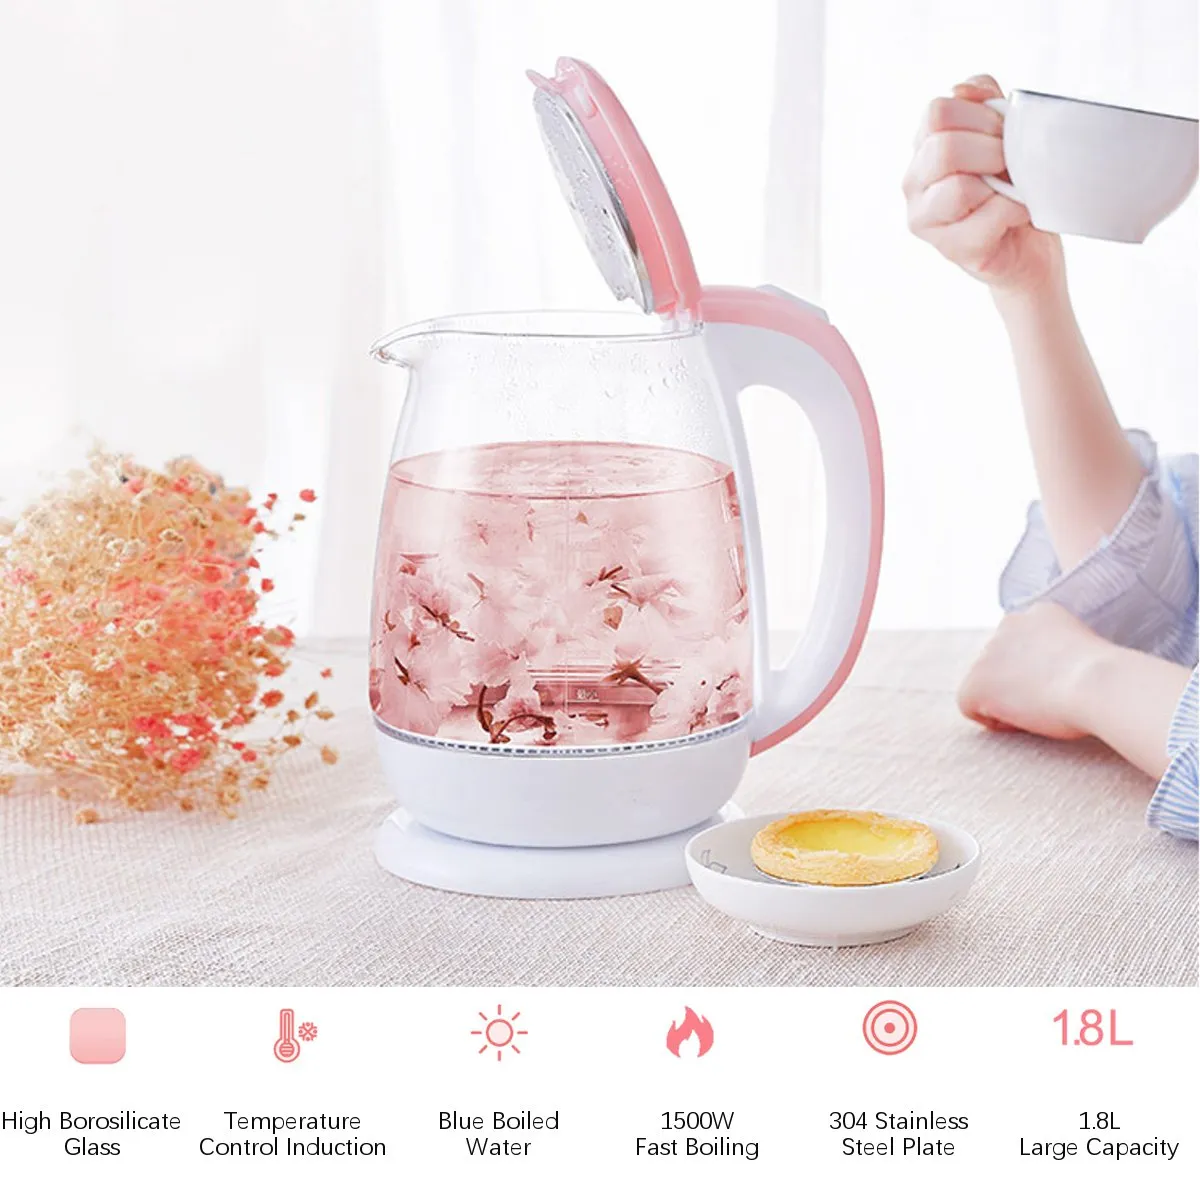 Pink 1 8L Glass Automatic Electric Water Kettle 1500W Water Heater Boiling Tea Pot Kitchen Appliance Temperature Control3007